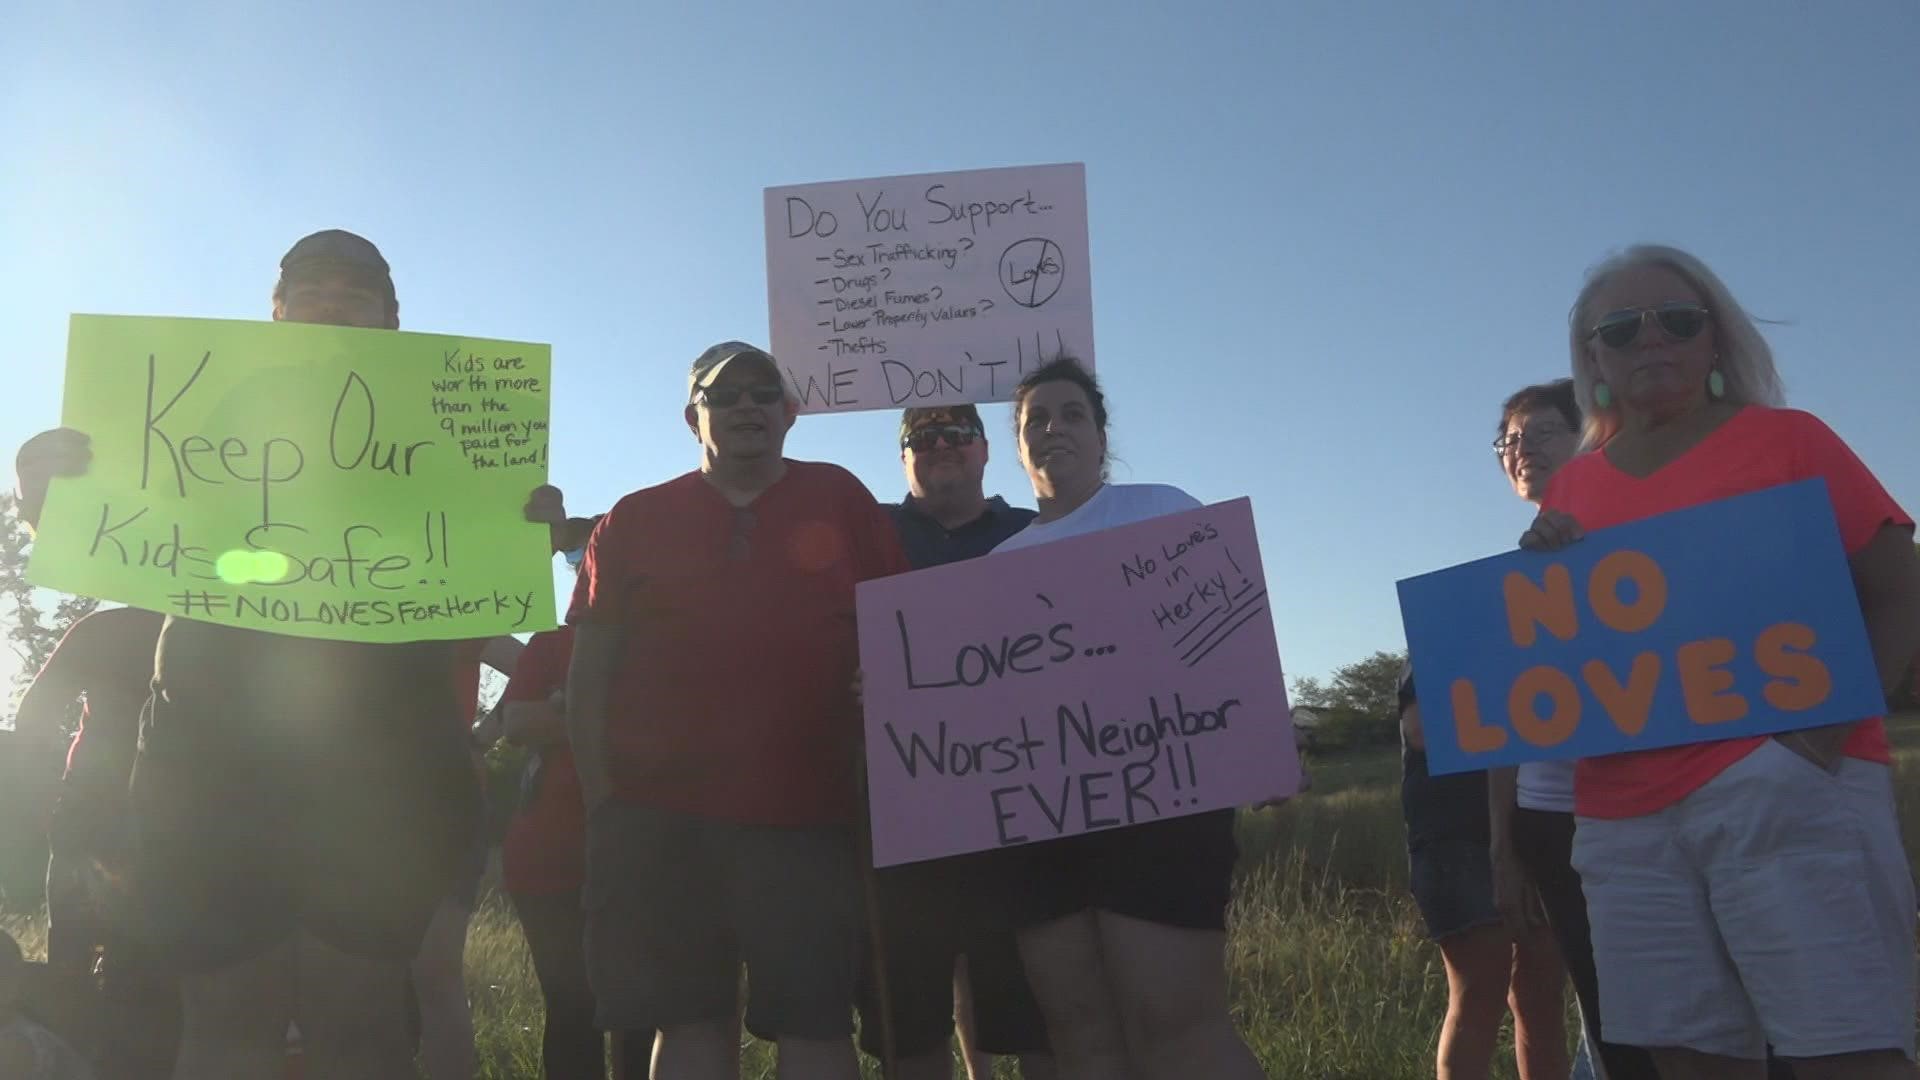 In an effort to get the town and Love's to tap the breaks on the project, residents started an online petition listing their concerns.